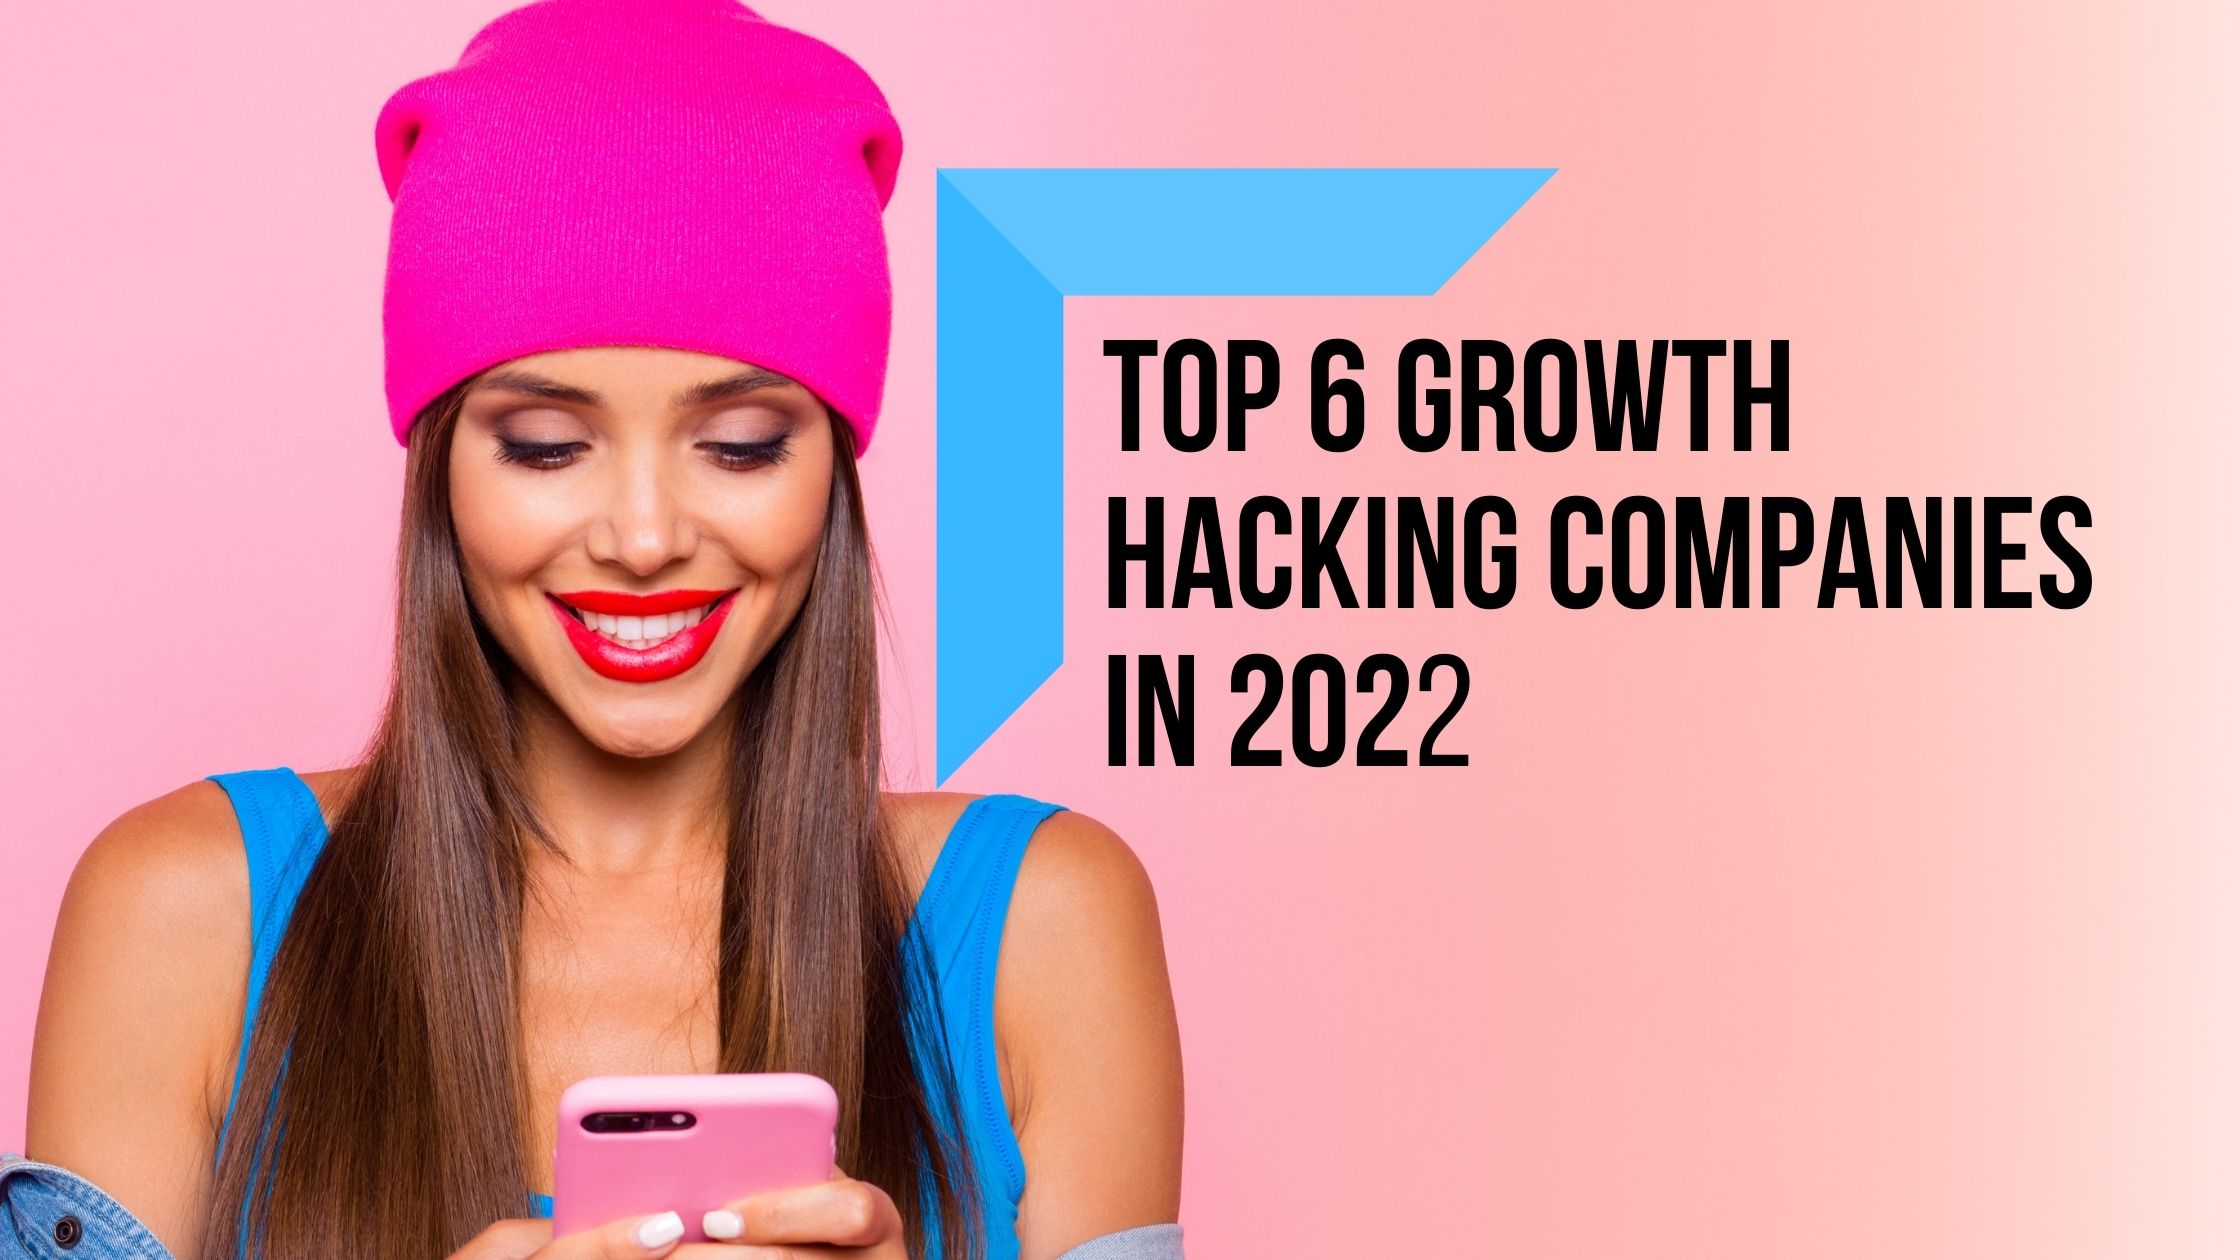 Top 6 Growth Hacking Companies in 2022